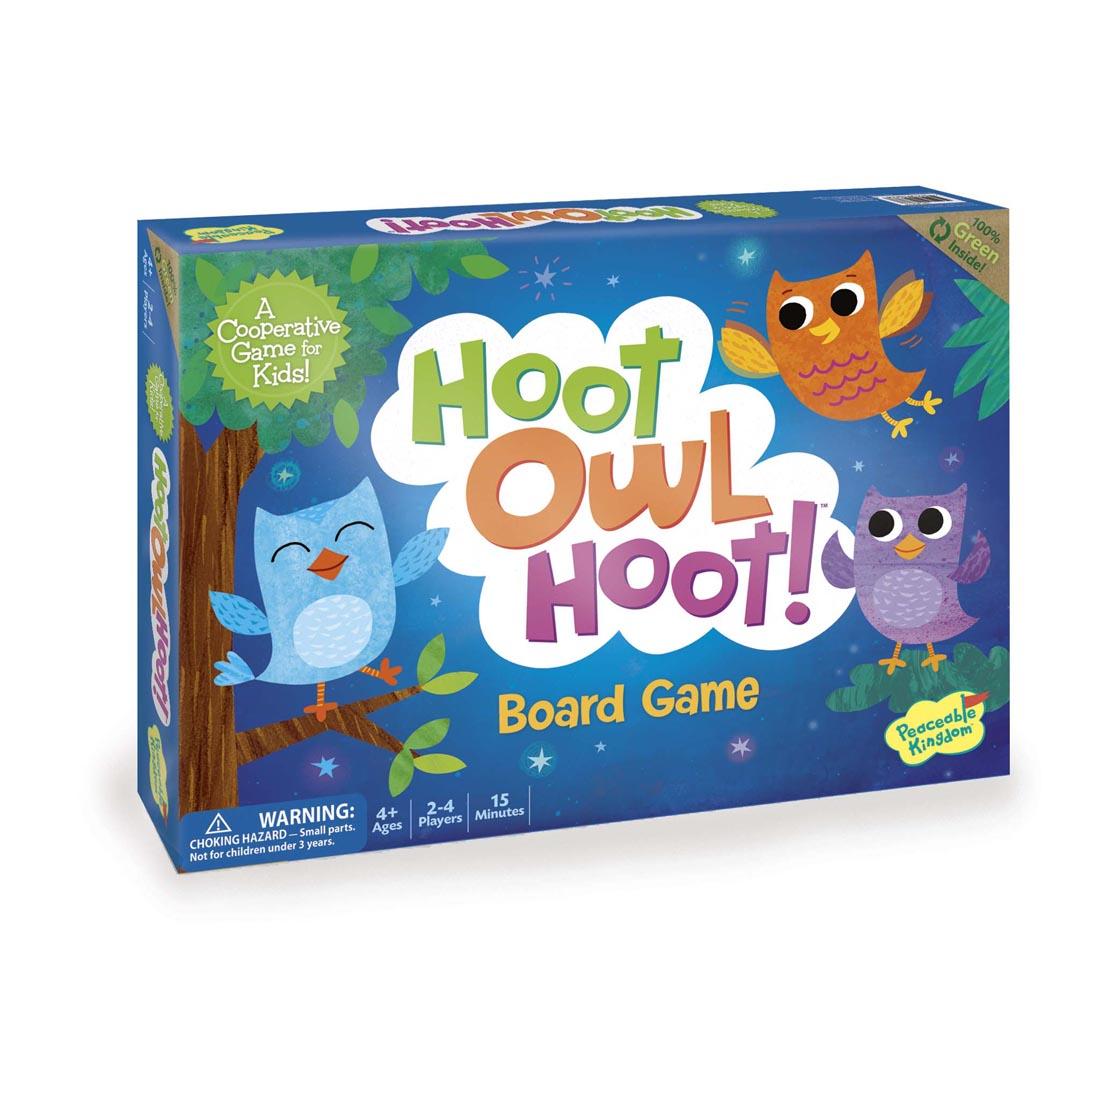 Hoot Owl Hoot! Cooperative Board Game by Peaceable Kingdom